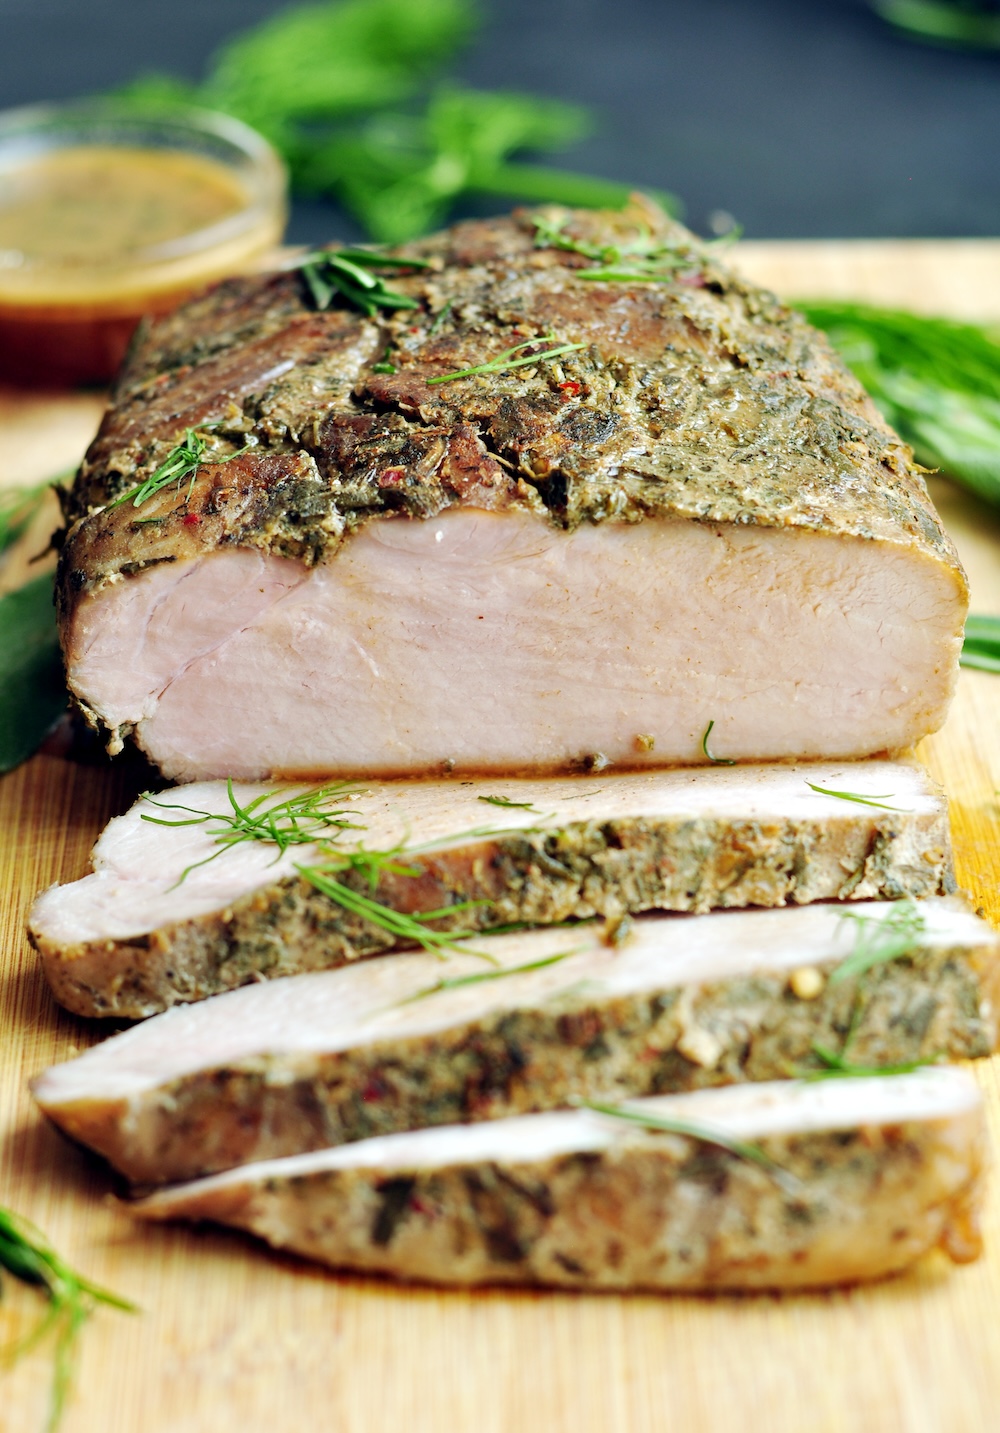 This sous vide pork loin roast is a foolproof way to make a restaurant-quality meal at home easily. The green garlic-herb marinade is a must-try with pork.